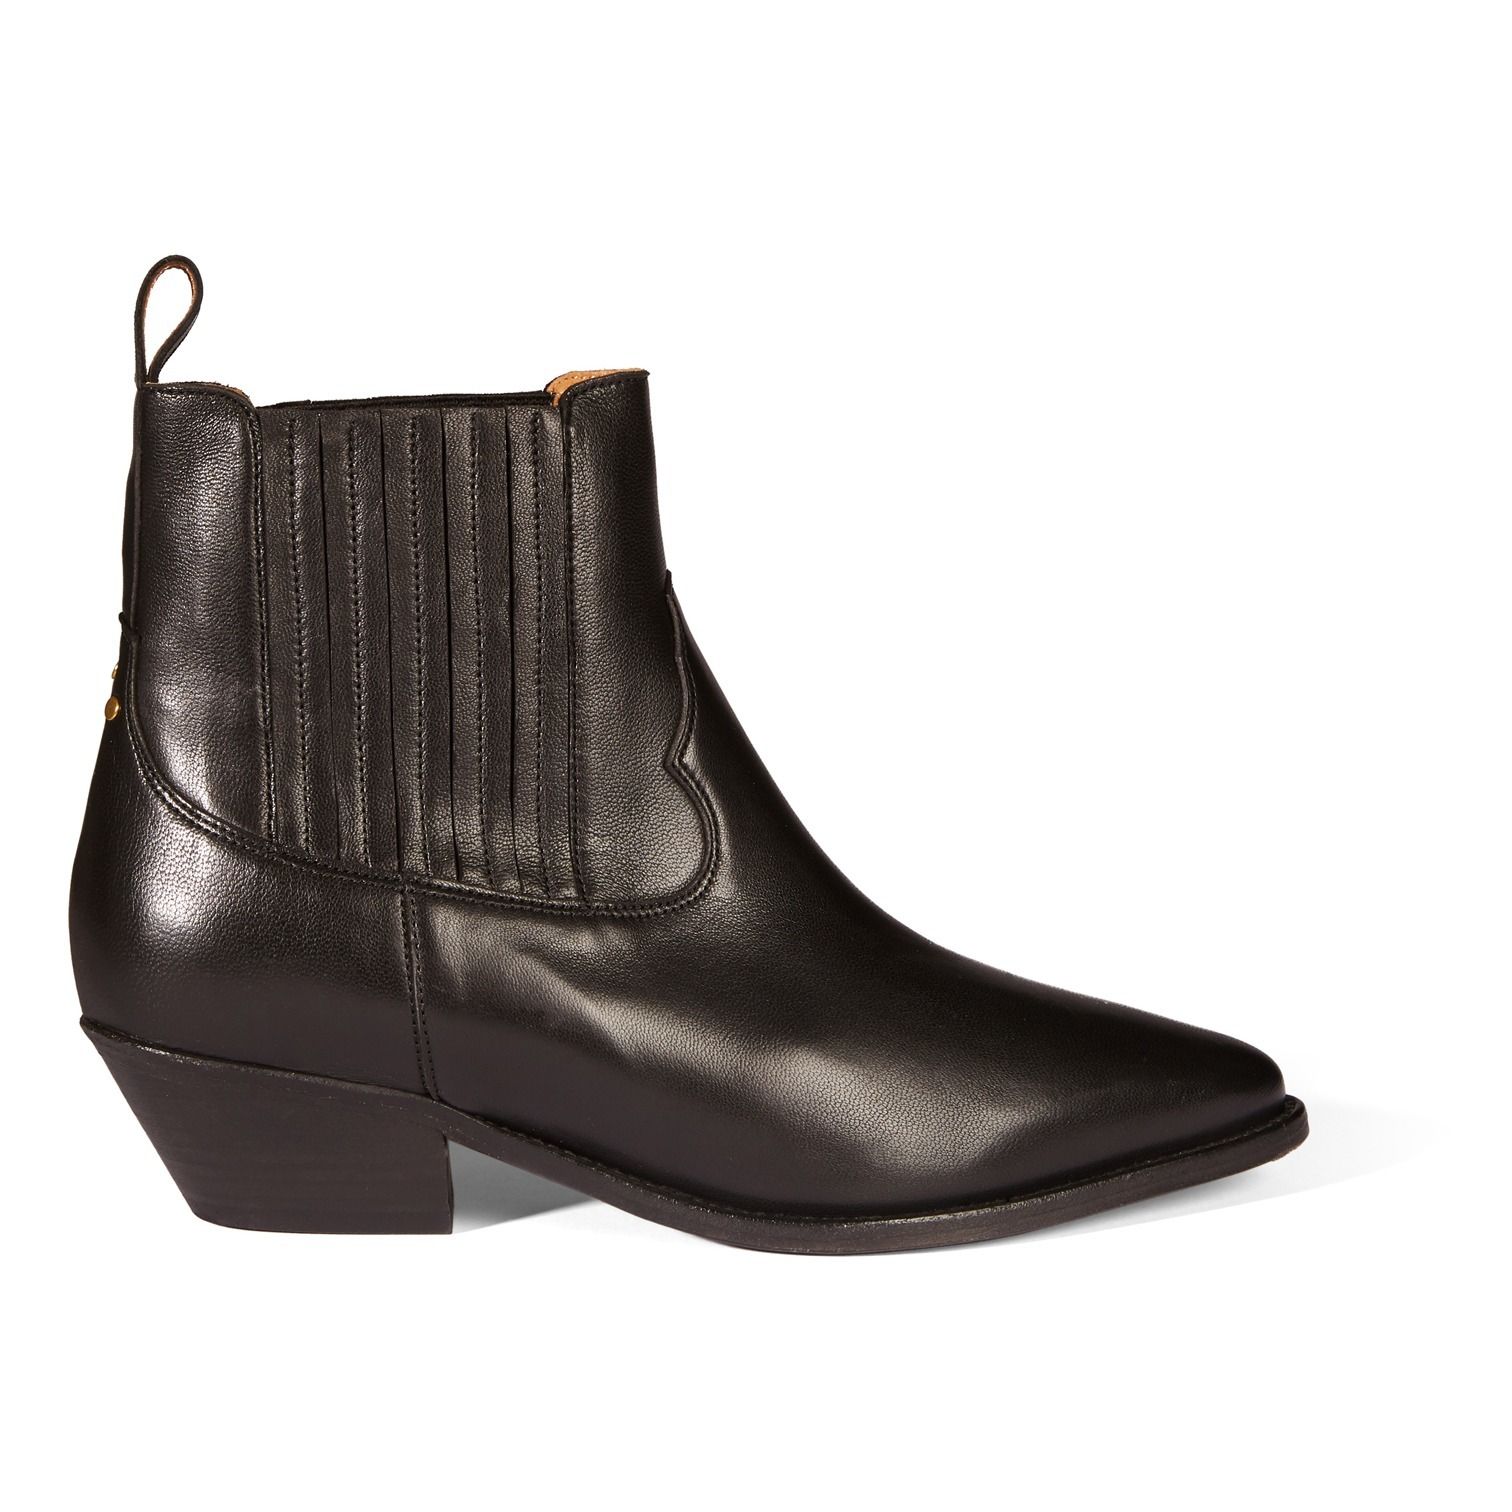 Jérôme Dreyfuss - Edith Lambskin Leather Boots - | Smallable